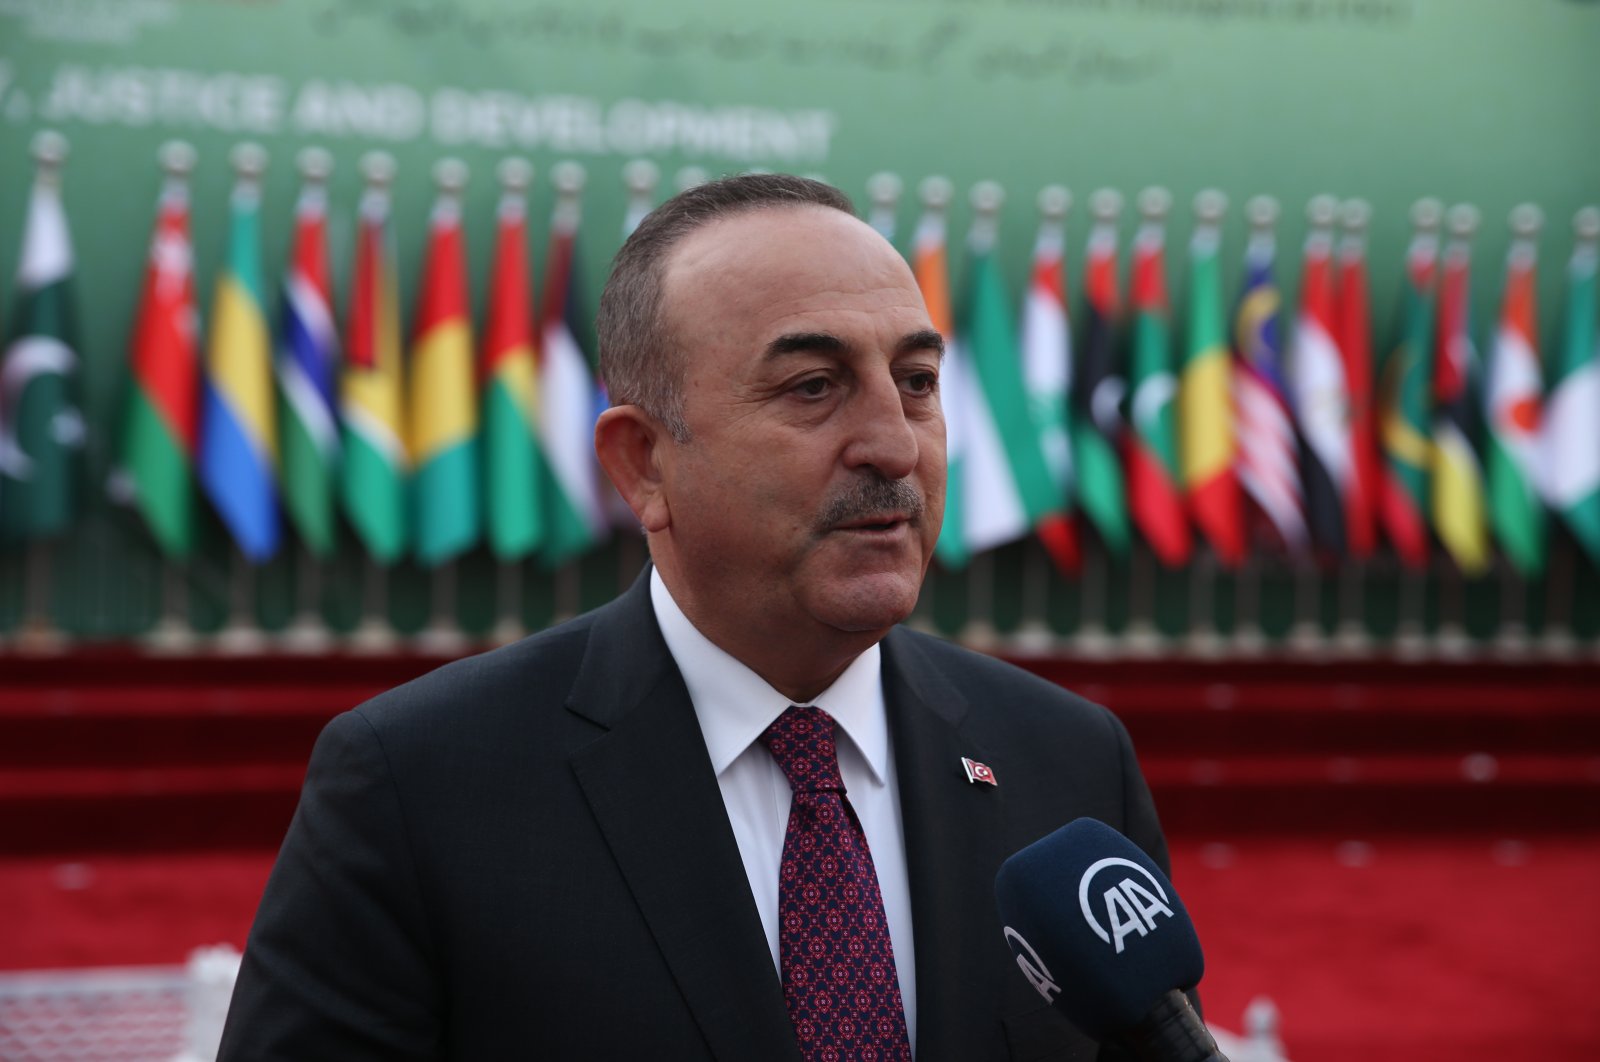 Foreign Minister Mevlüt Çavuşoğlu speaks to the press during a summit of Organisation of Islamic Cooperation (OIC) in Islamabad, Pakistan, March 30, 2022. (AA File Photo)